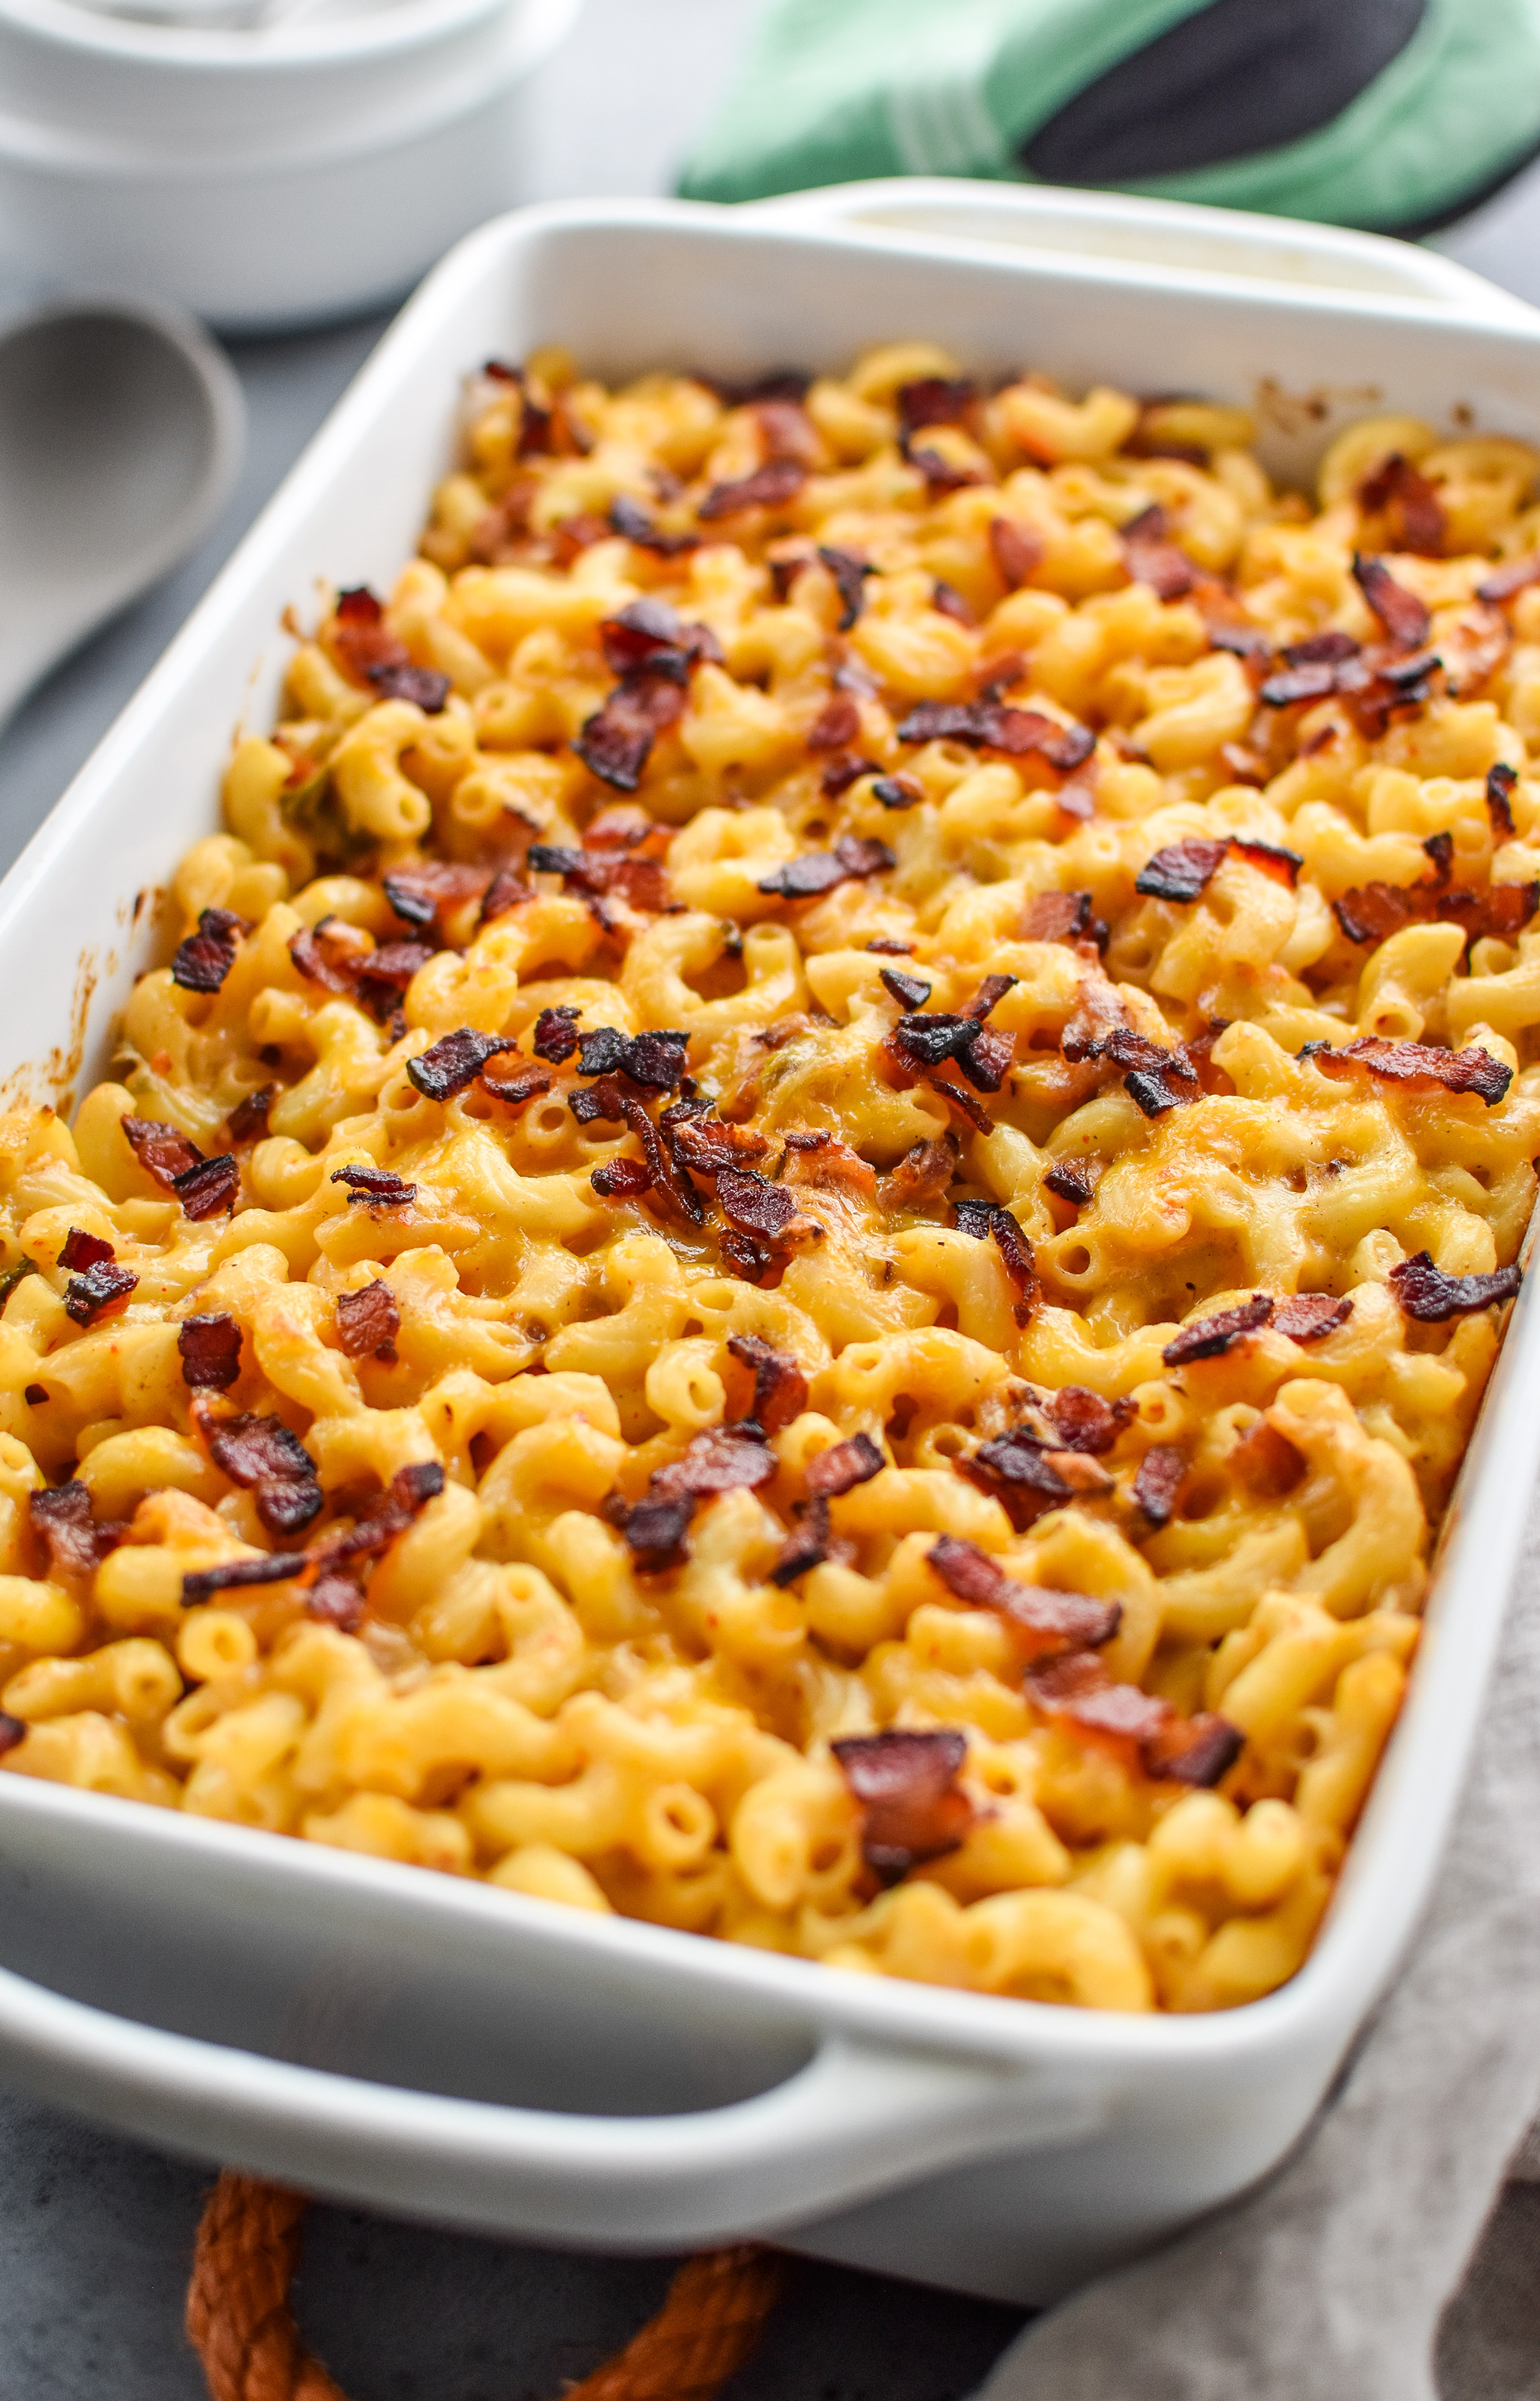 Kimchi and bacon greek yogurt macaroni and cheese fresh from the oven ready for dinner